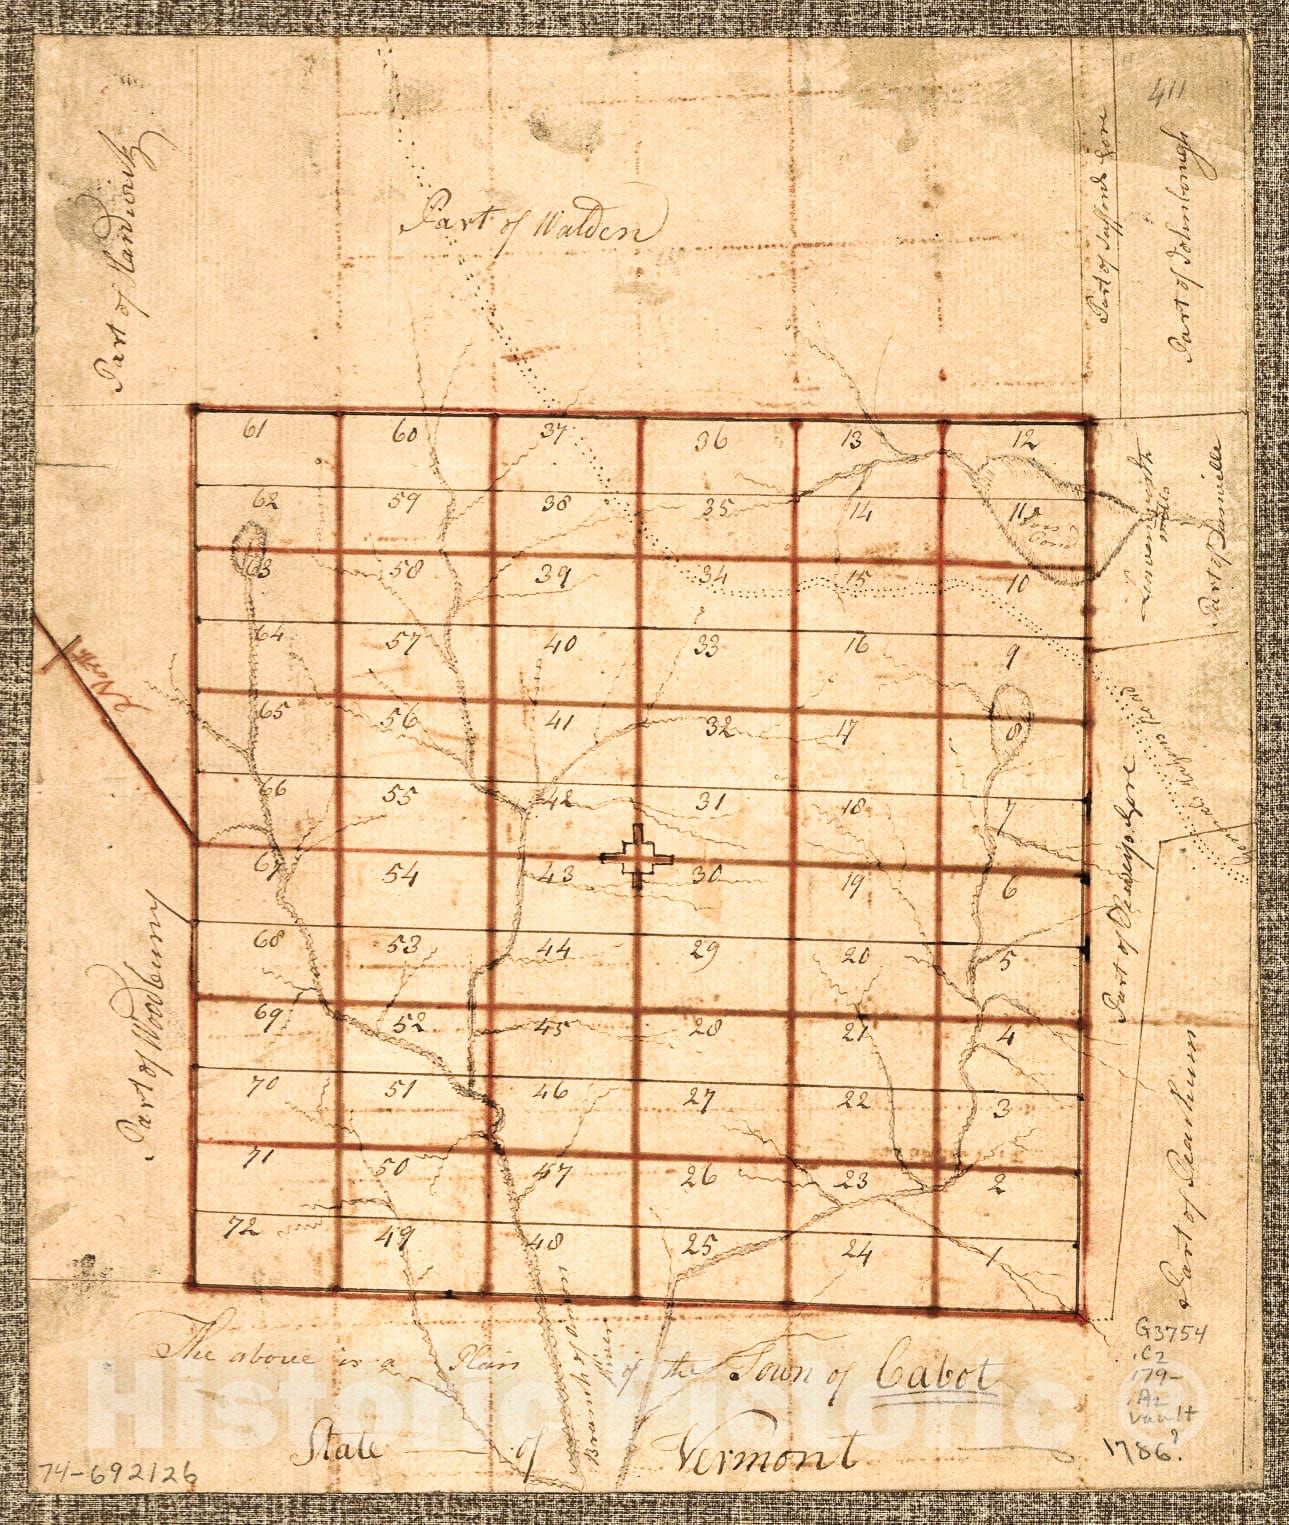 Historic 1780 Map - The Above is a Plan of The Town of Cabot, State of Vermont.